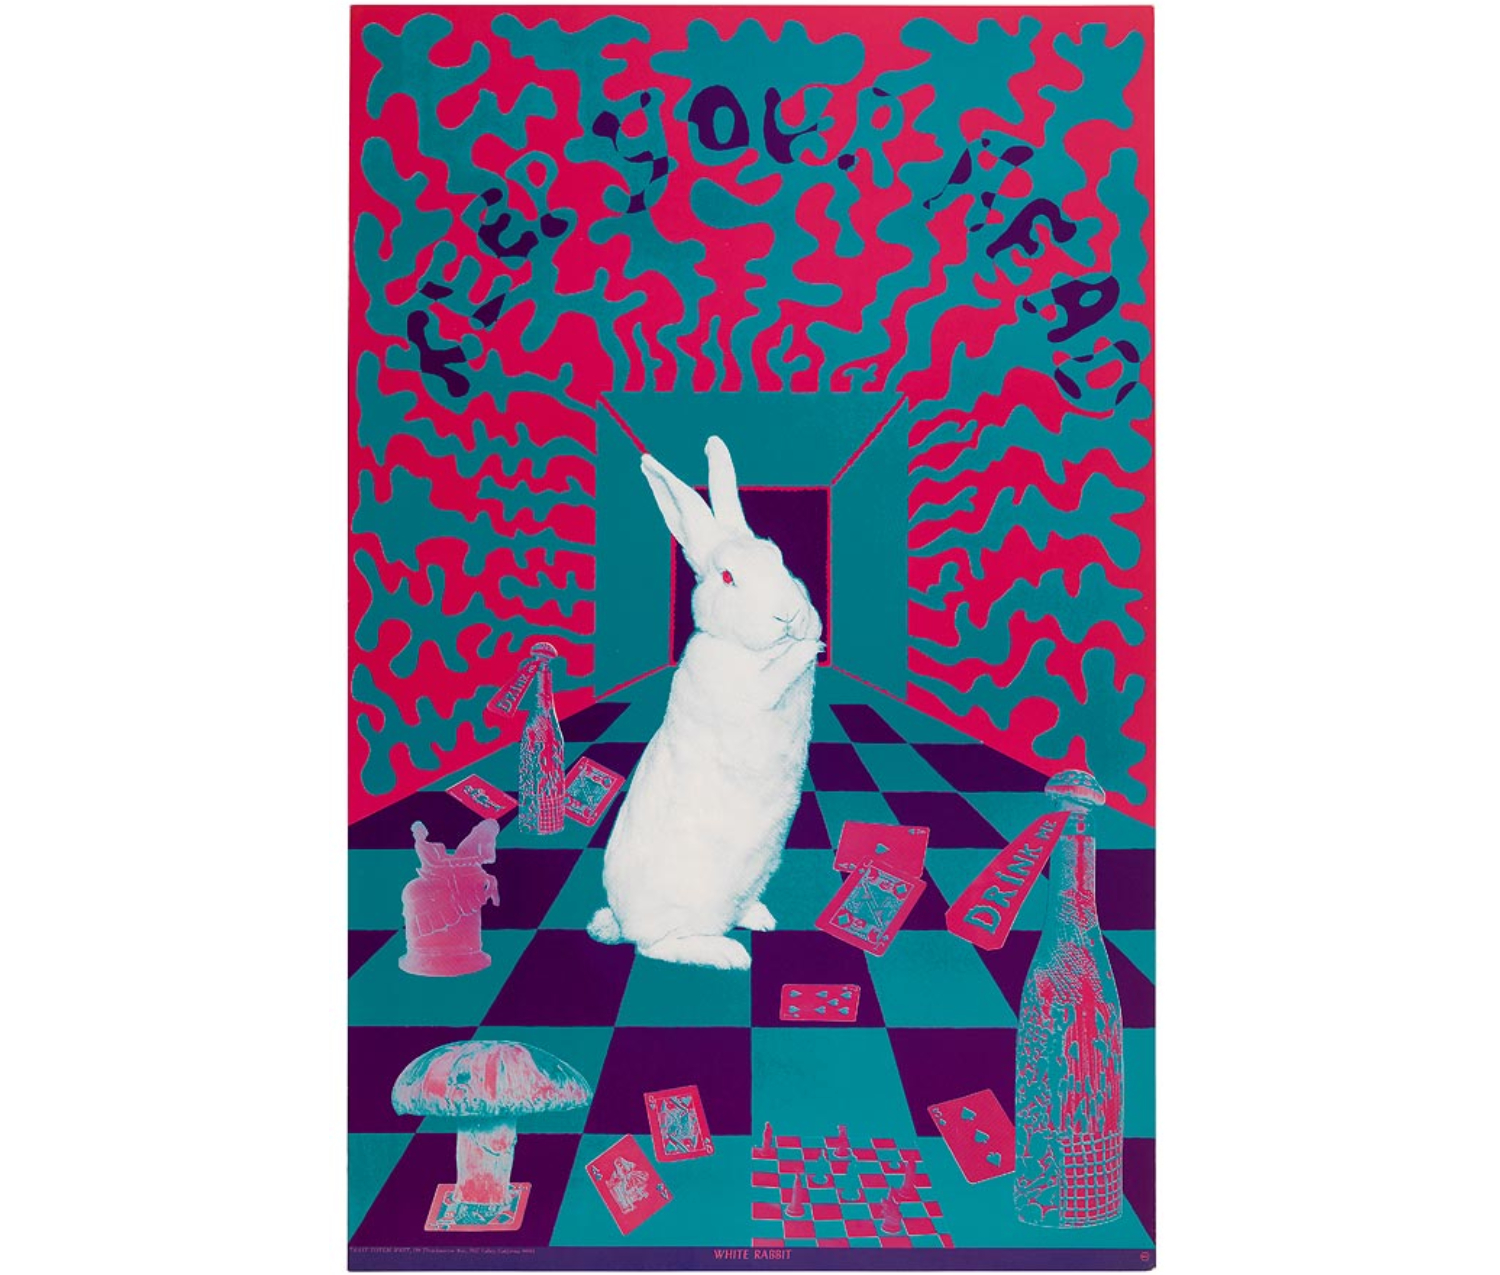 Pink, white, blue and purple; large checked floor receding into a doorway with scattered playing cards, mushroom in lower left, bottle in lower right with DRINK ME on label, chessman at mid left and another bottle with DRINK ME on its label, white rabbit in center sitting up with pink eye, the wall around the doorway is made up of camouflage squiggles in pink and blue with KEEP YOUR HEAD in purple appearing through the pattern.